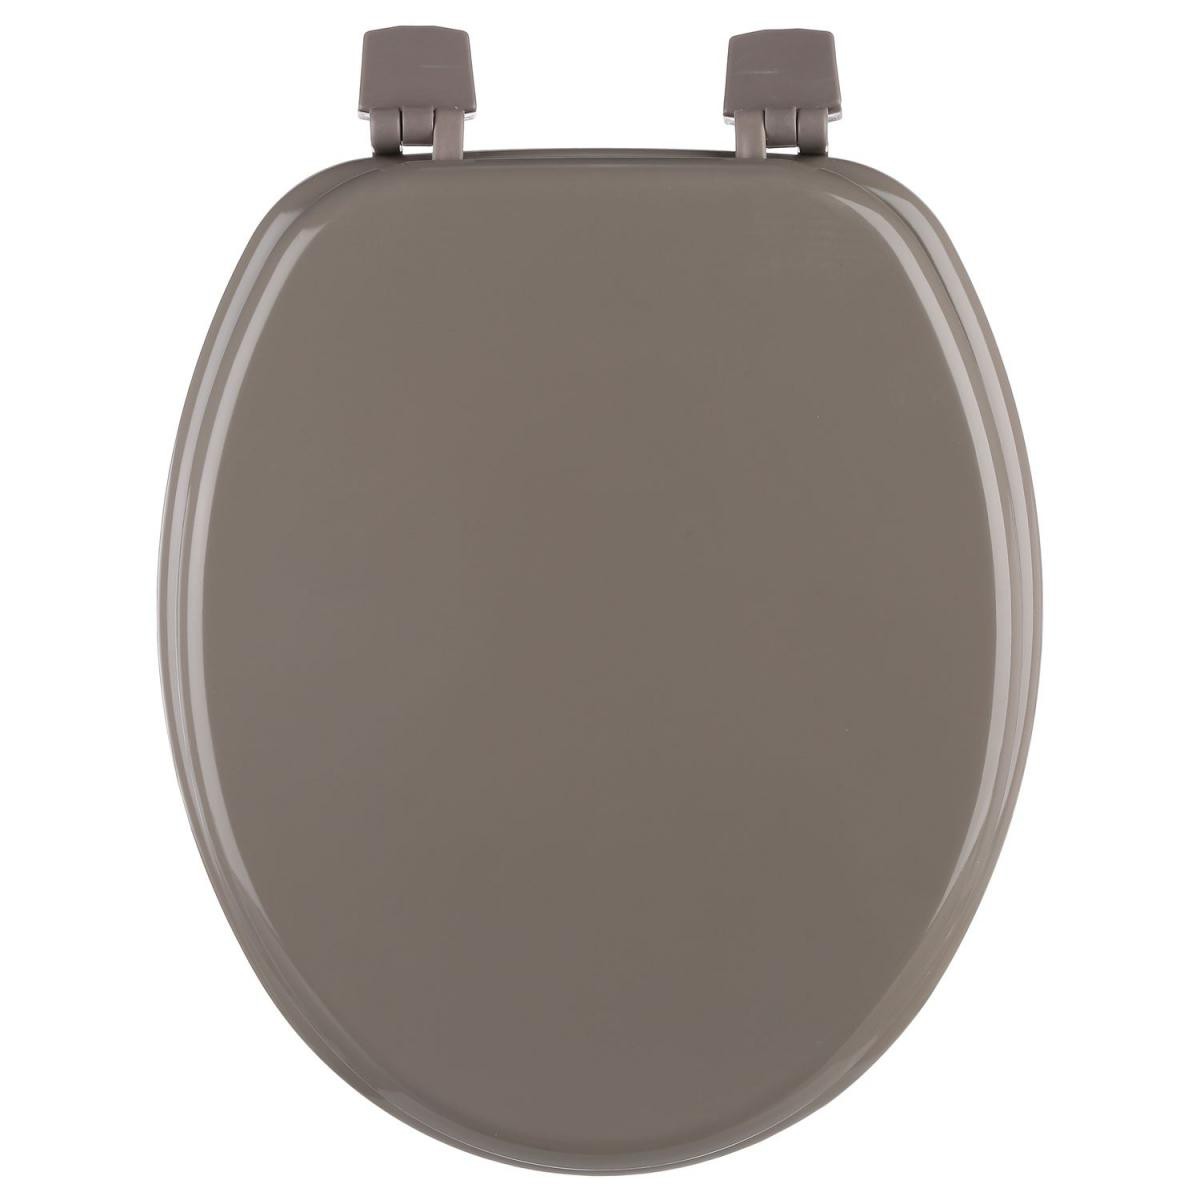 Instant D'O - Abattant WC - Bois - Taupe - Abattant WC